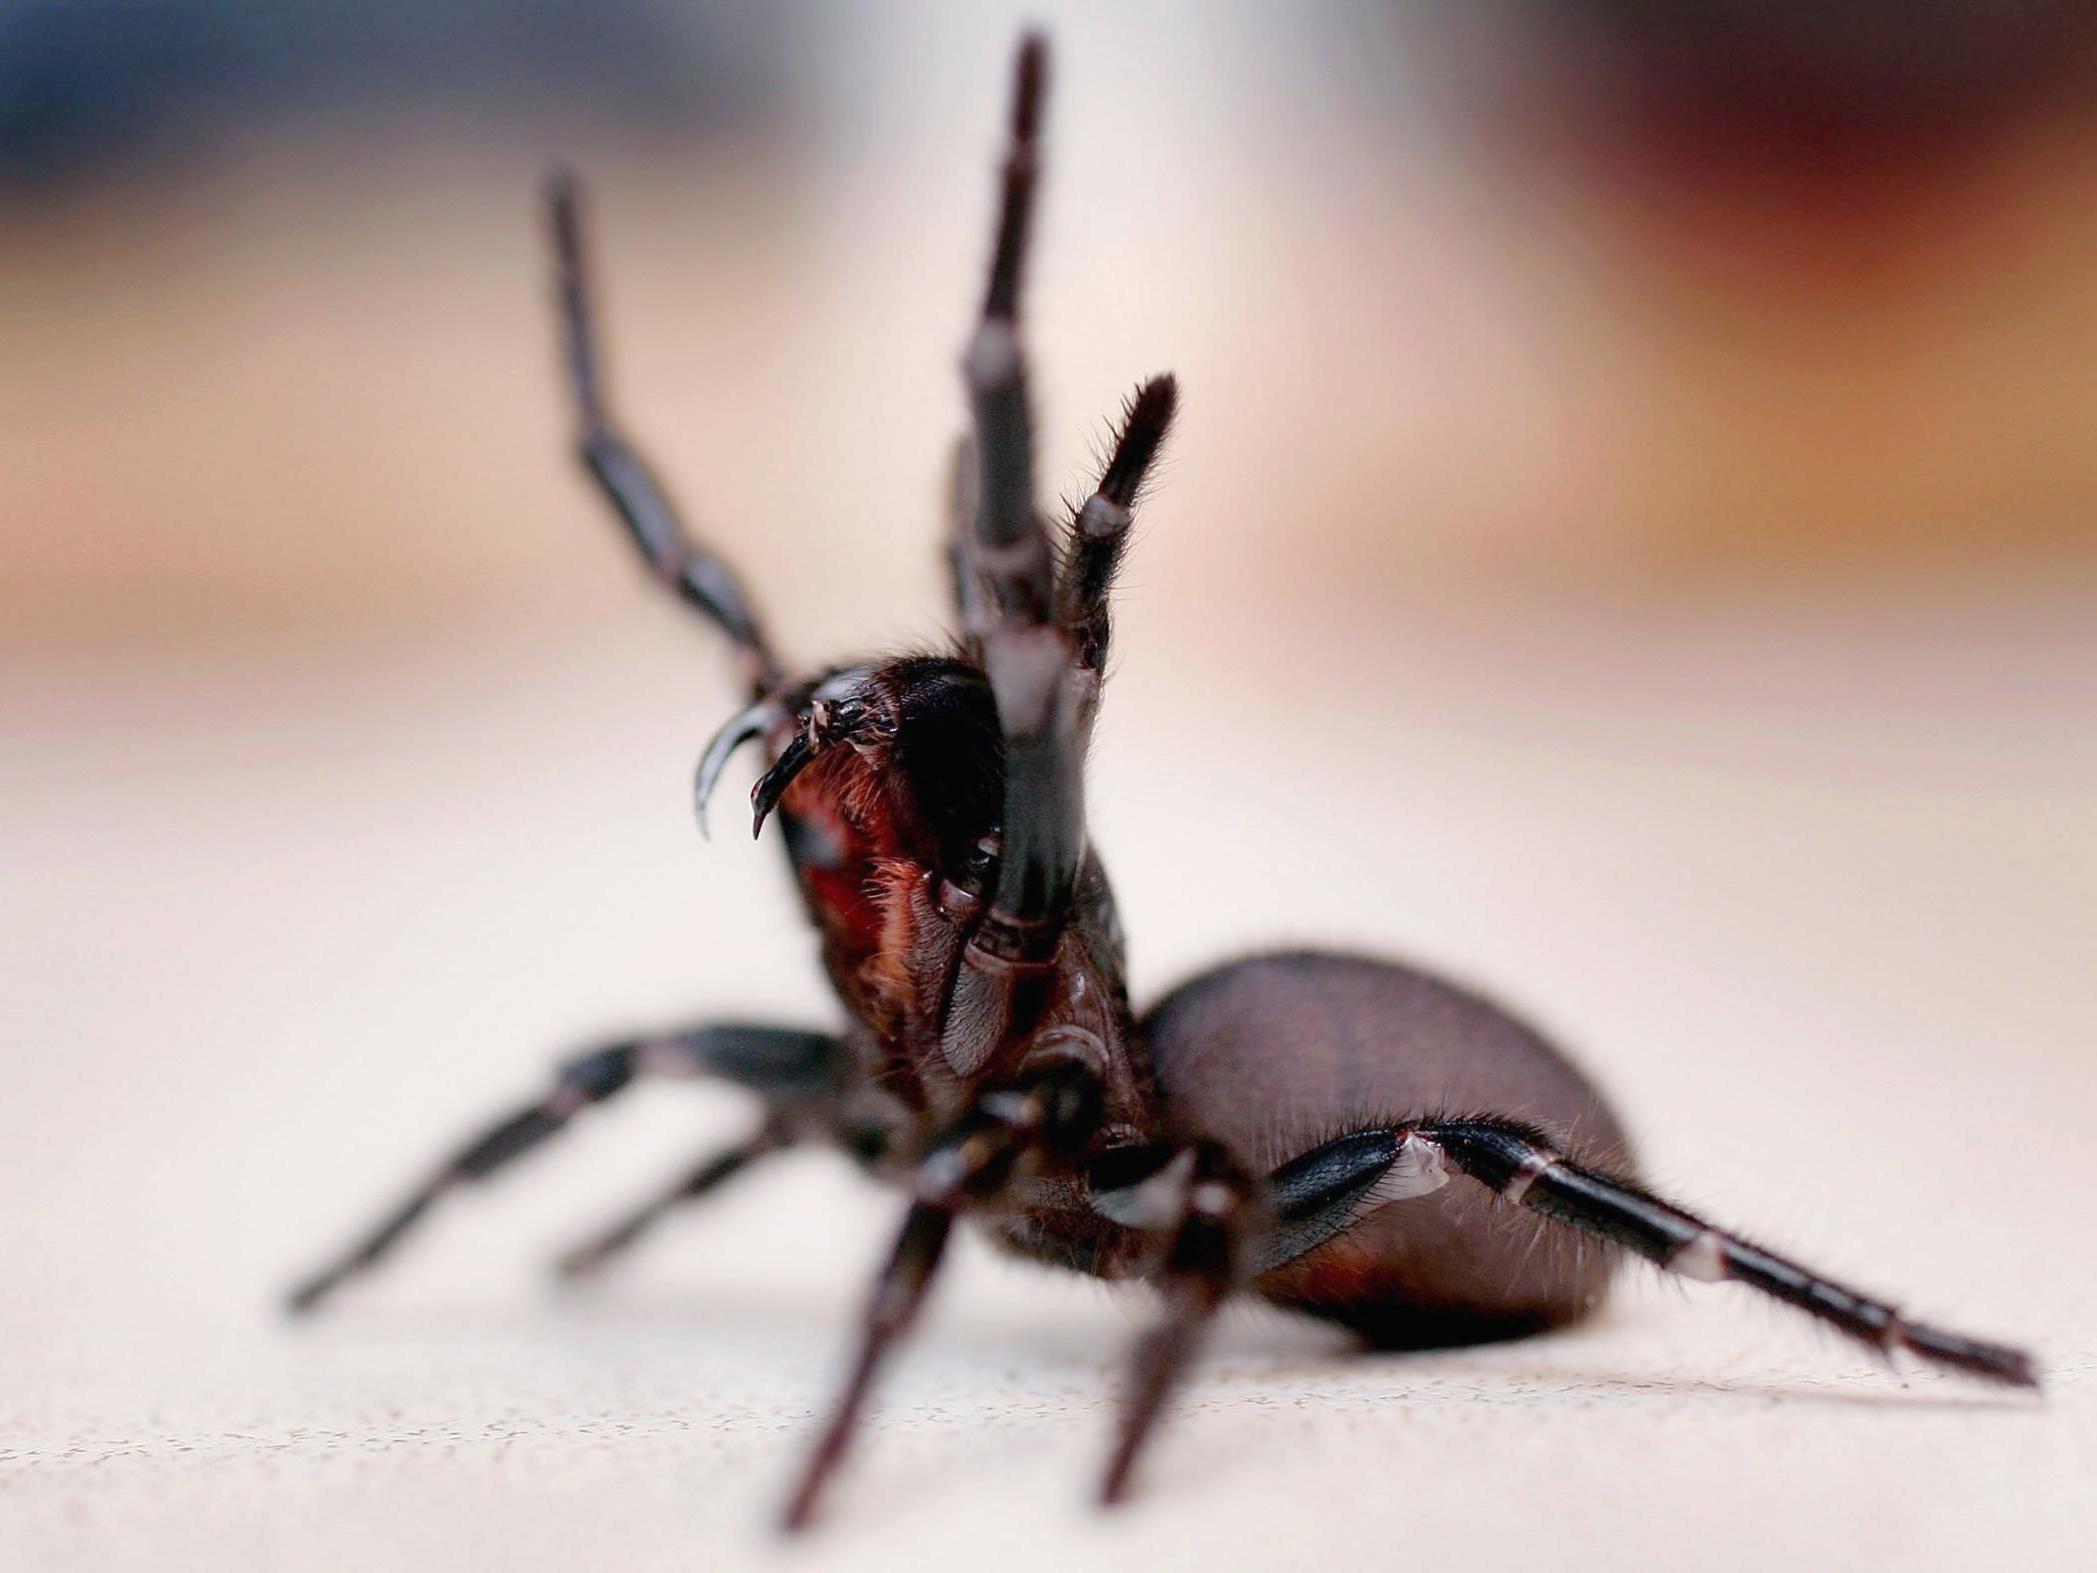 Australians warned of ‘bonanza’ of deadly funnel-web spiders after flash floods - The Independent